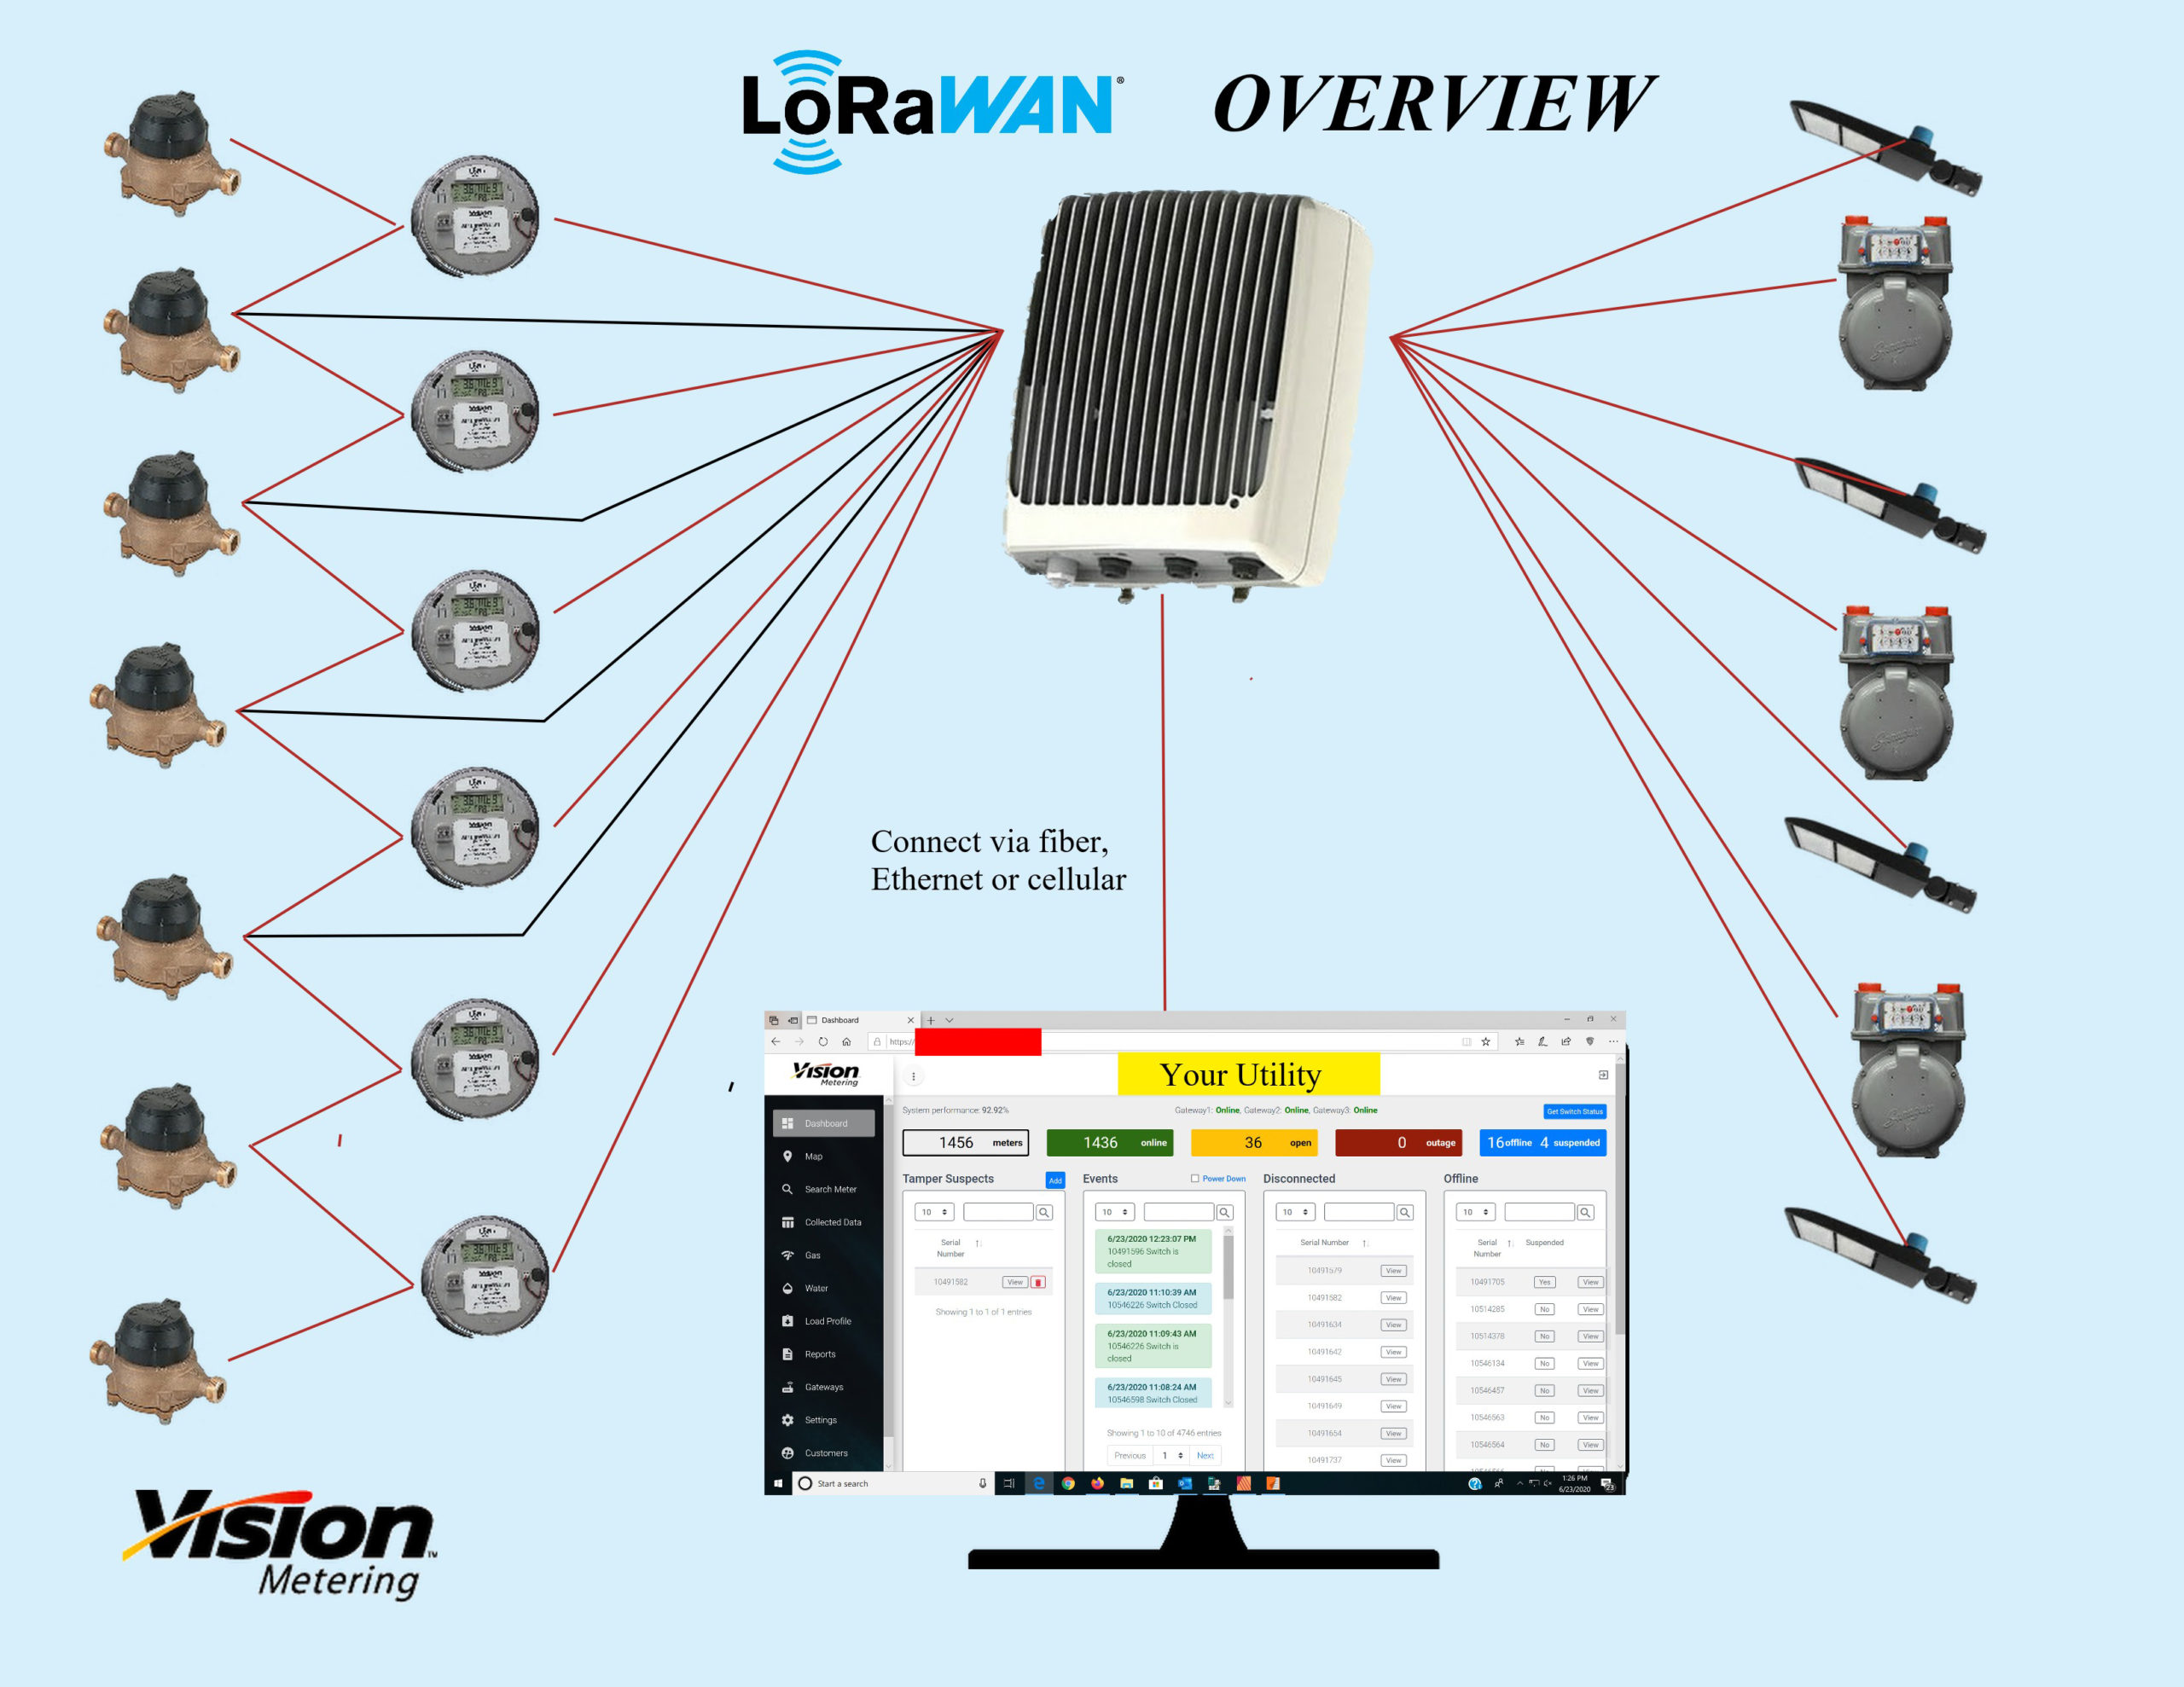 Advanced Metering Infrastructure That Uses LoRa<span class="sup">®</span>